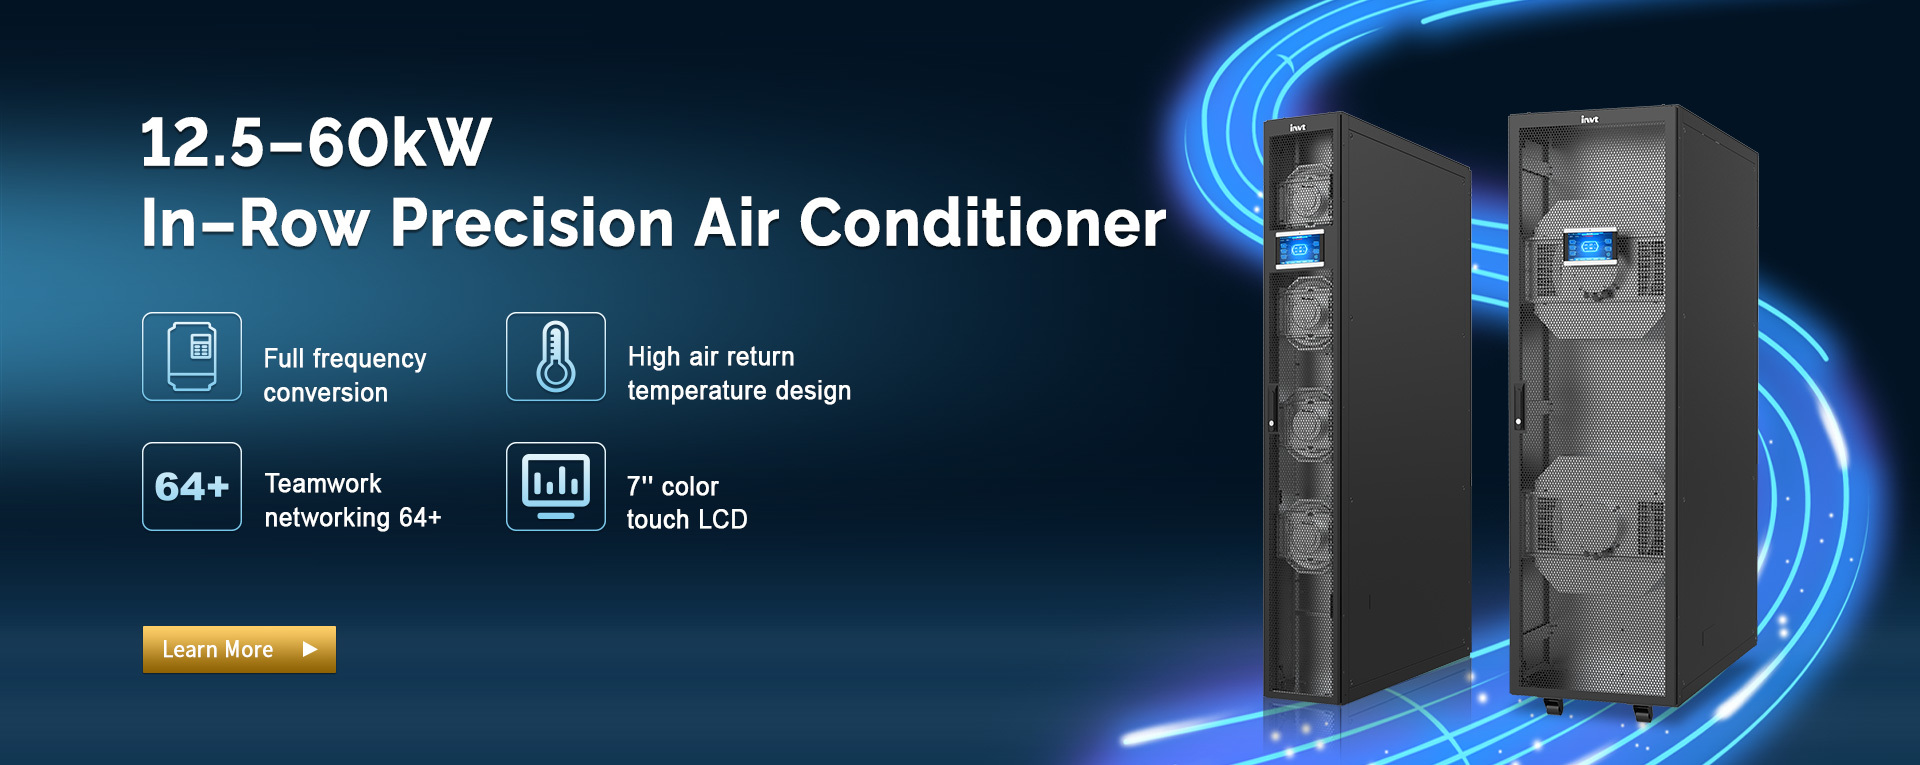 VCR Series 12.5-60kW In-row Precision Air Conditioner-INVT Power